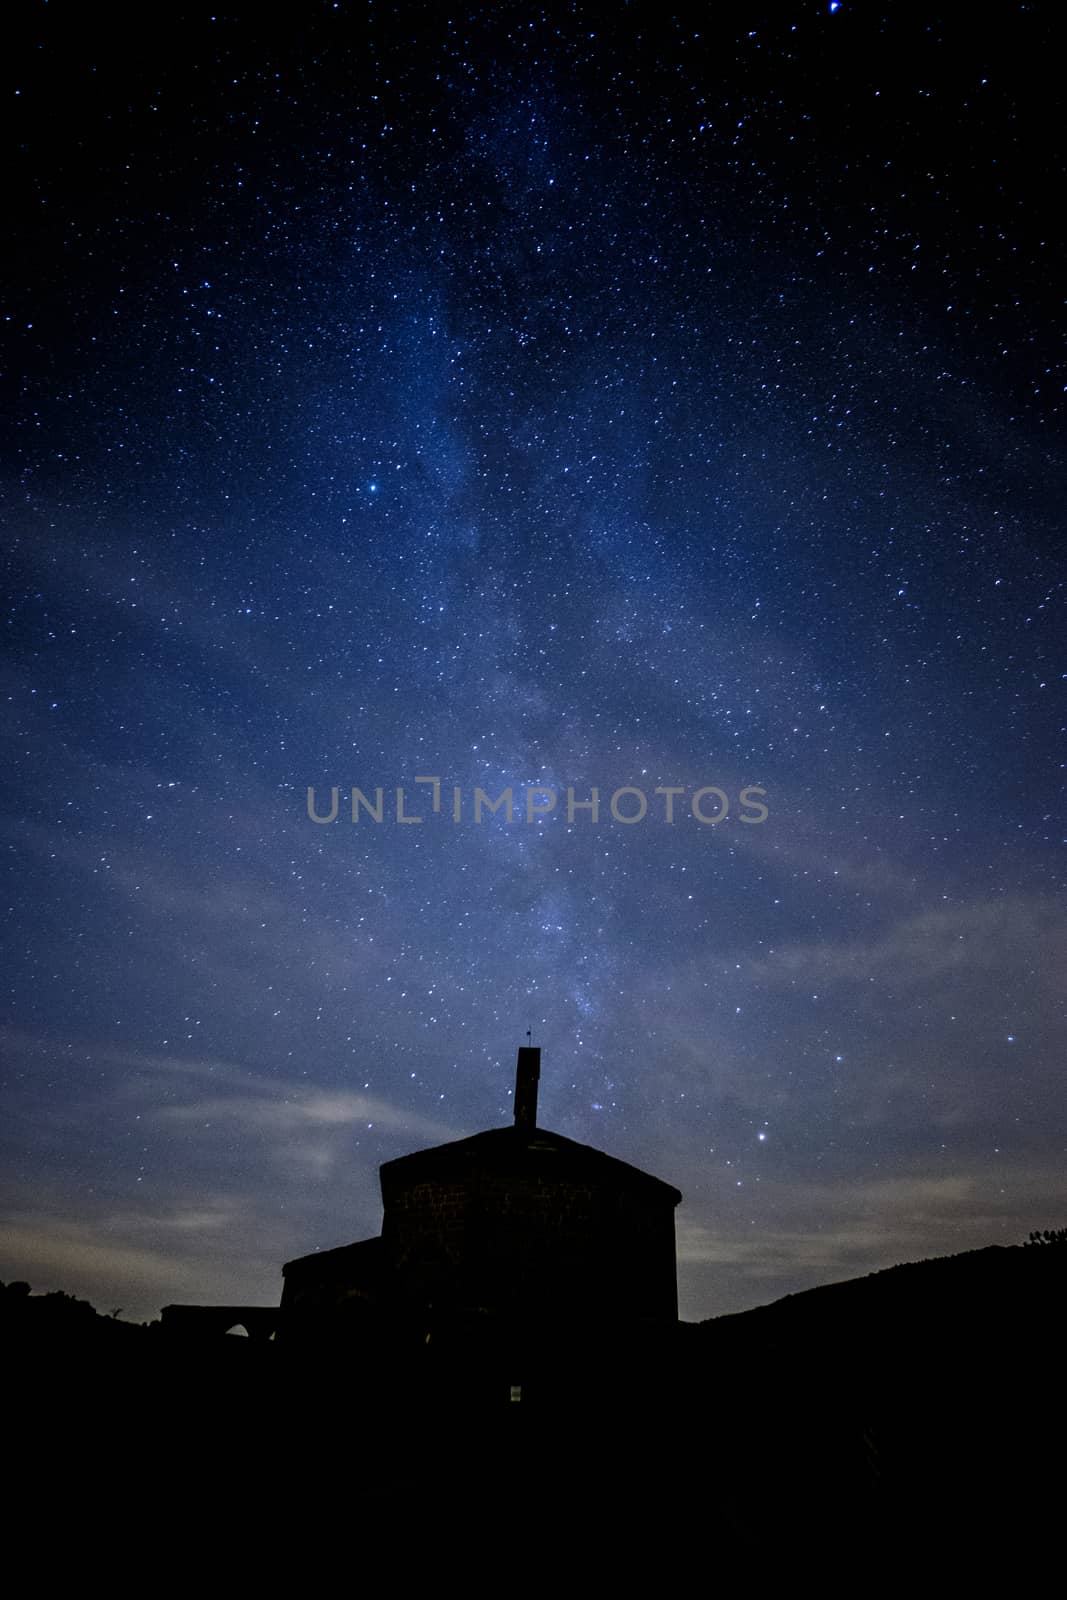 Milky way comming from Eunate church in a cloudy night near Pamplona, Spain by mikelju